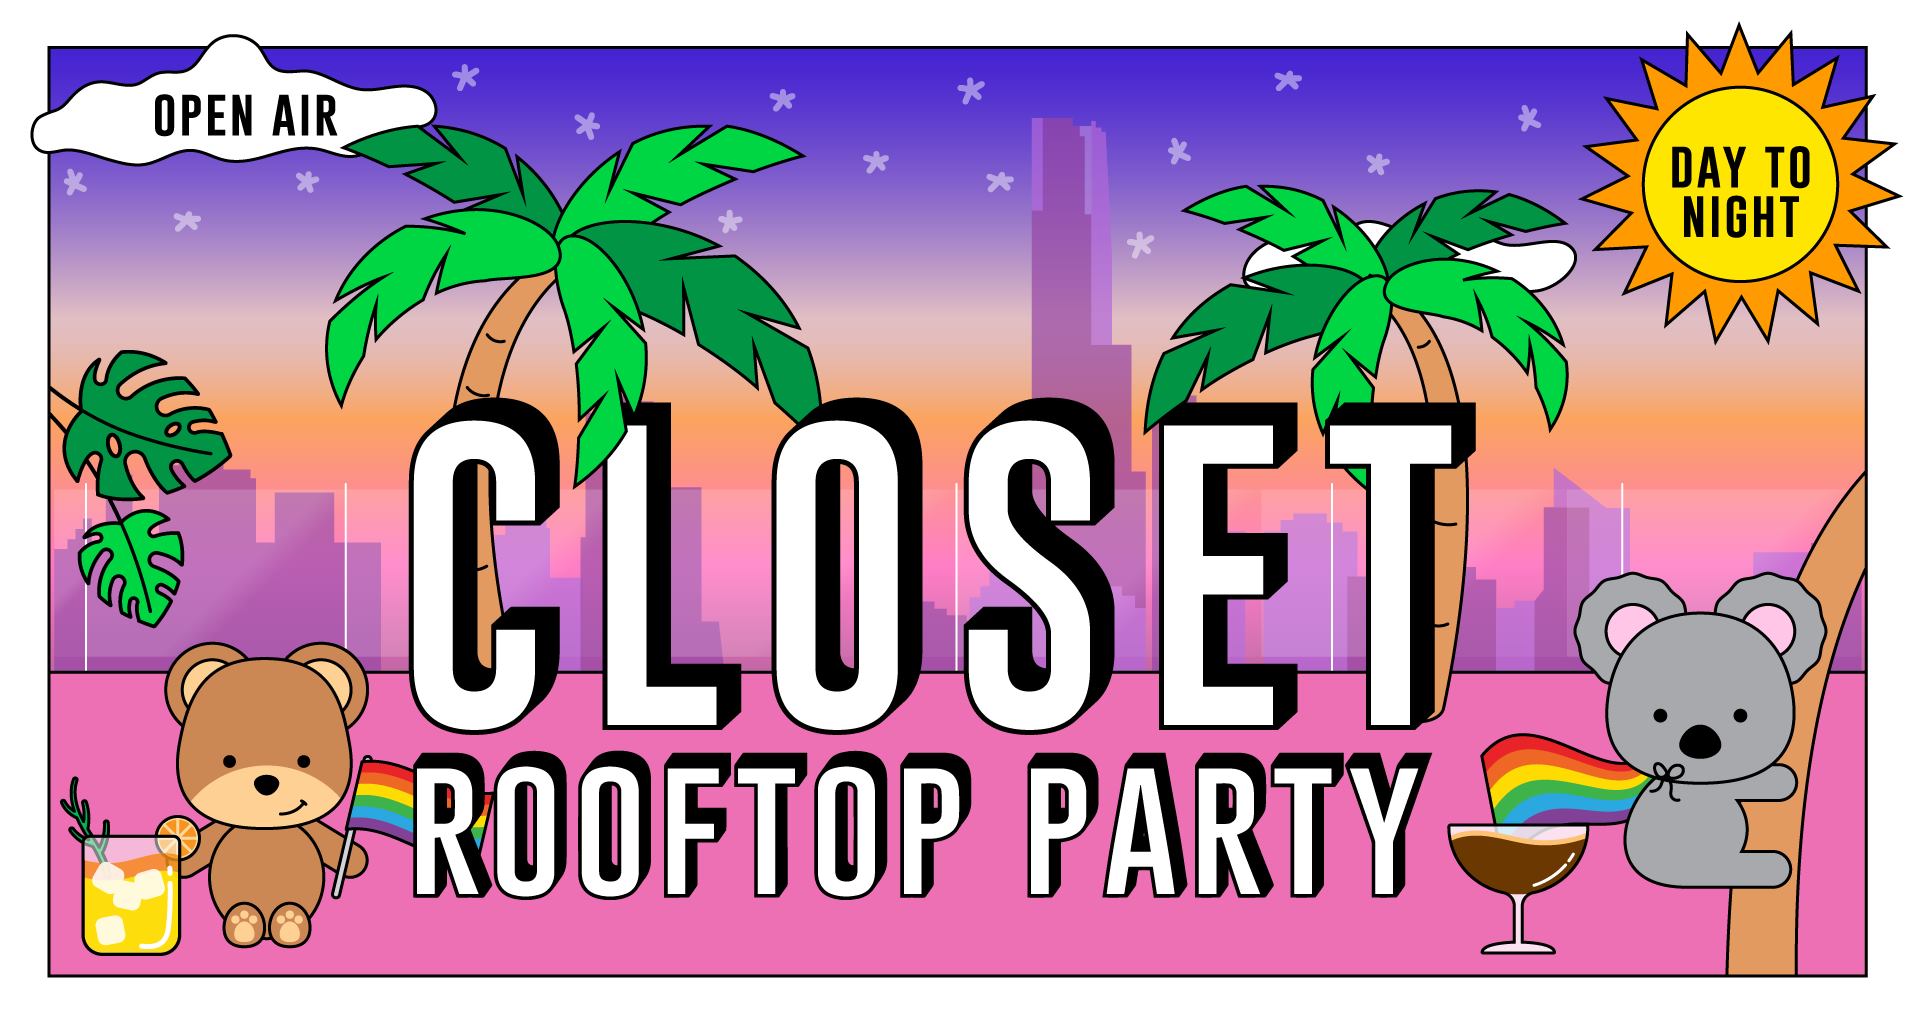 CLOSET Rooftop Party 2 (Labour Day Weekend)